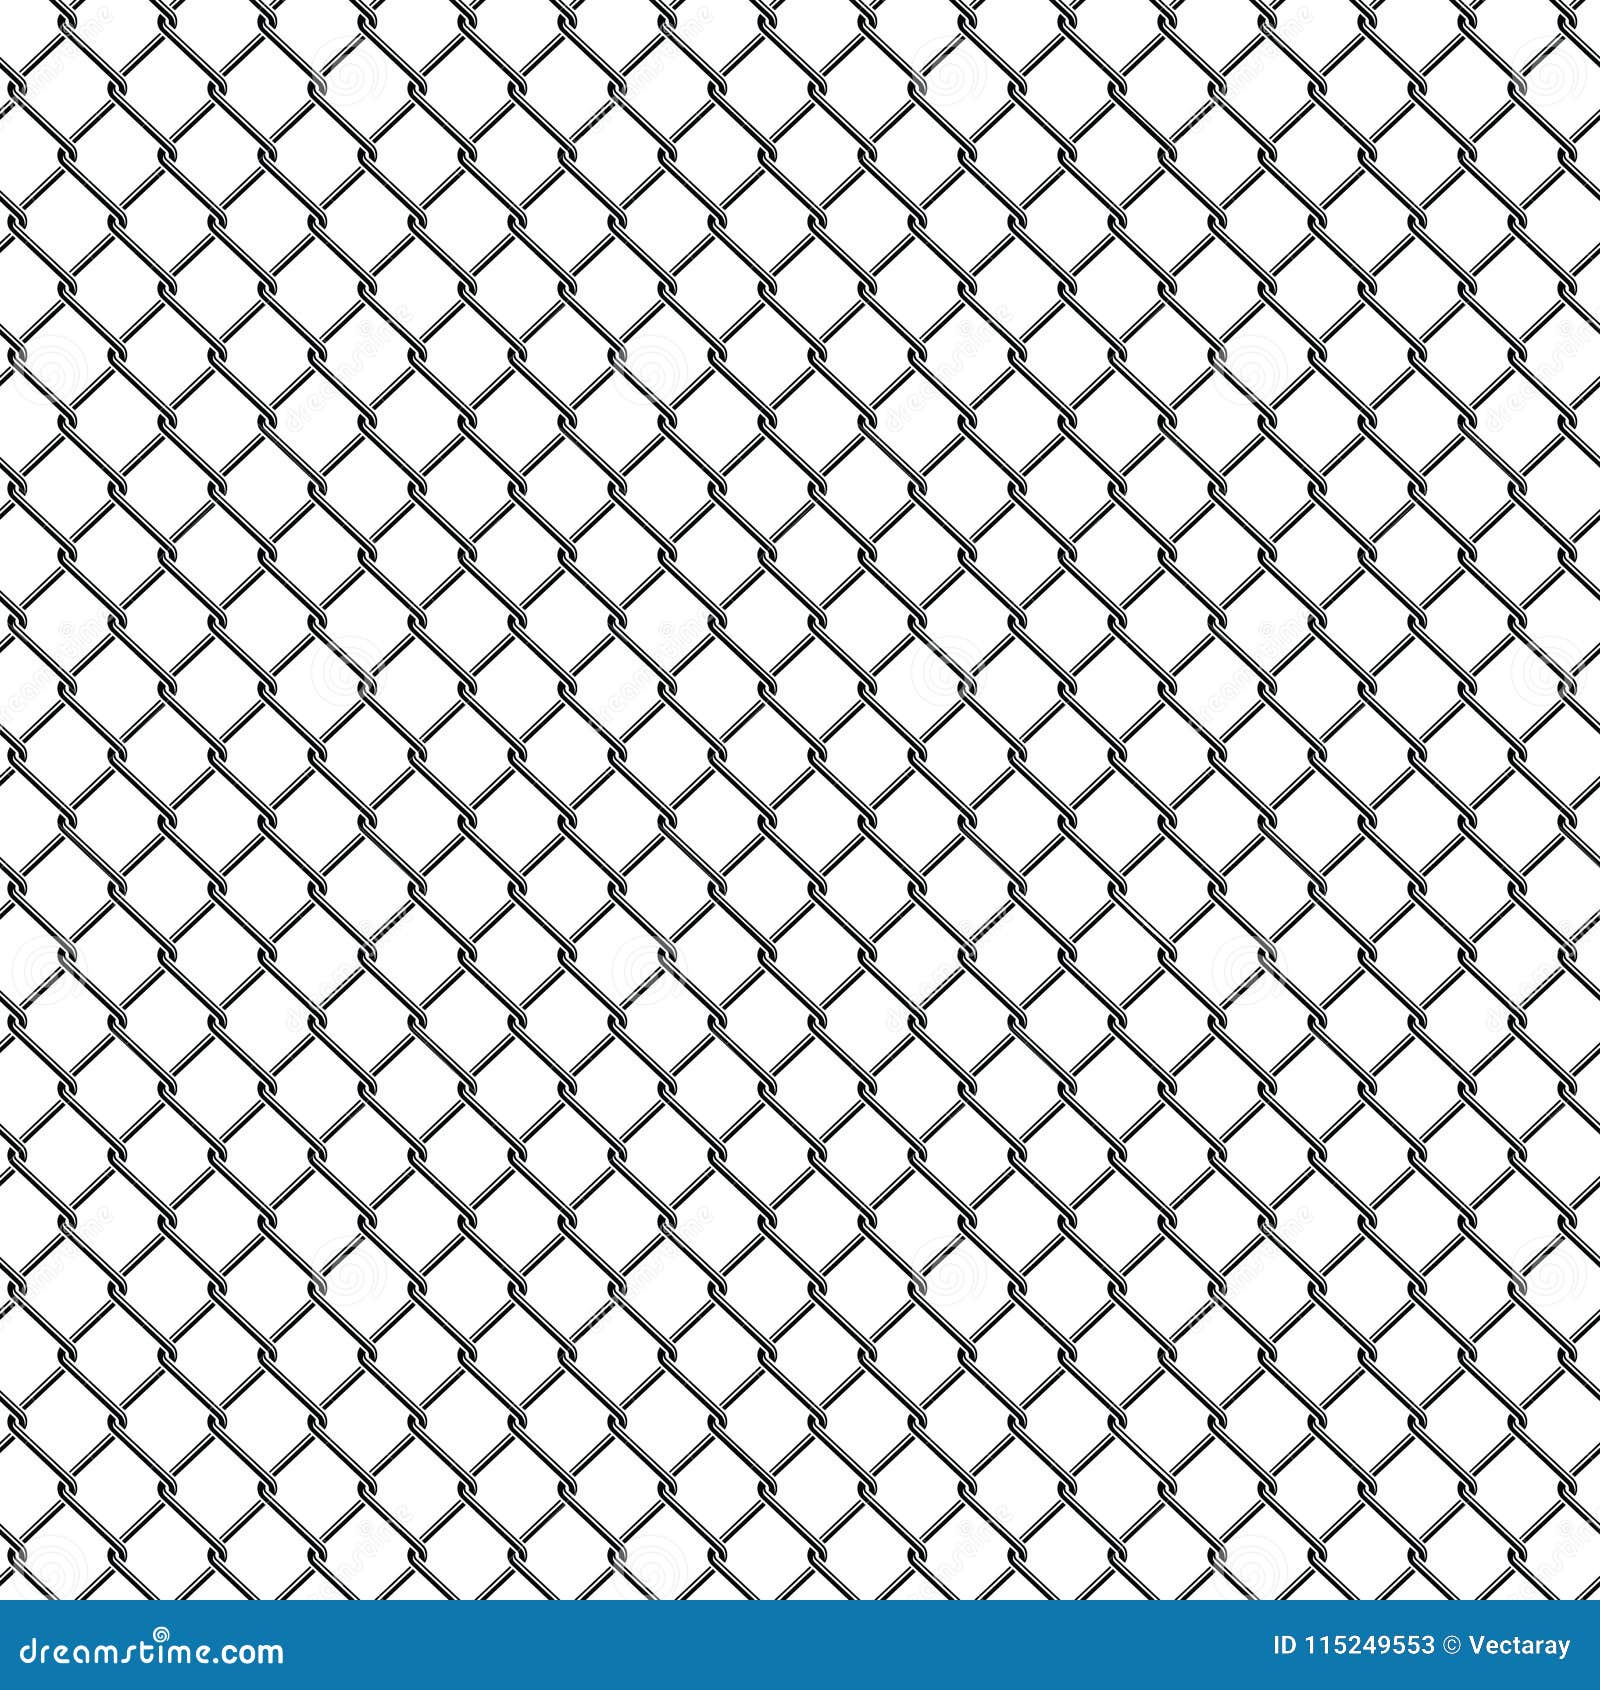 Seamless Detailed Chain Link Fence Pattern. Stock Illustration ...